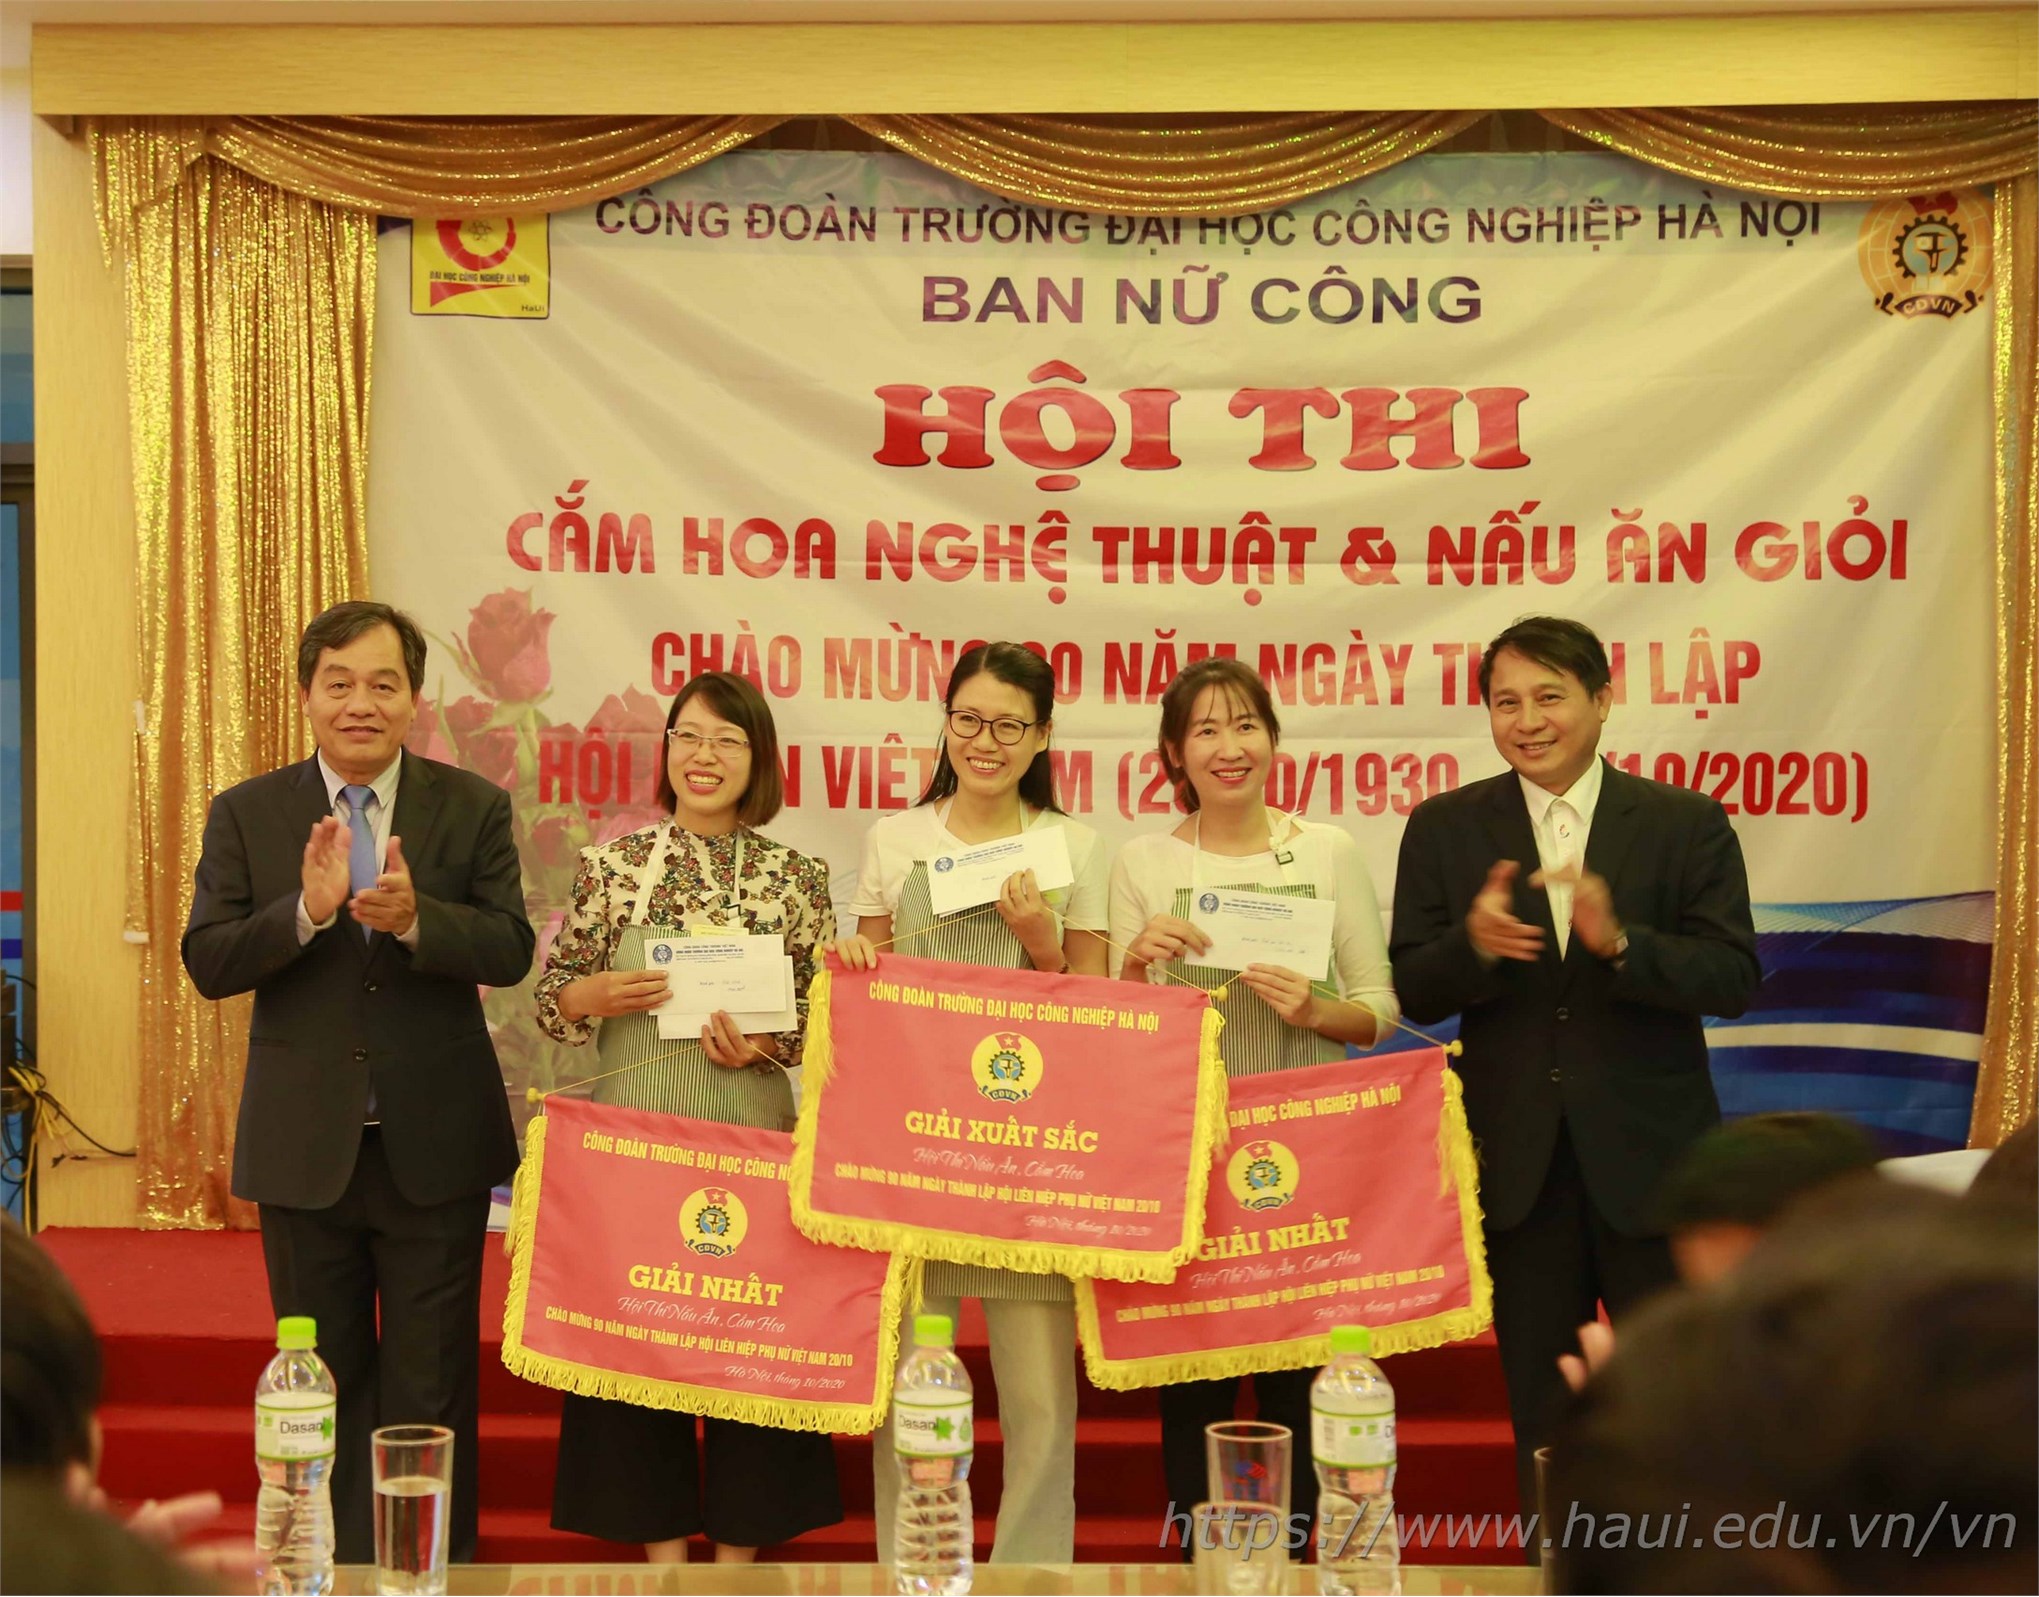 Cooking and Flower Arrangement Contest to celebrate 90th founding anniversary of Vietnam Women's Union